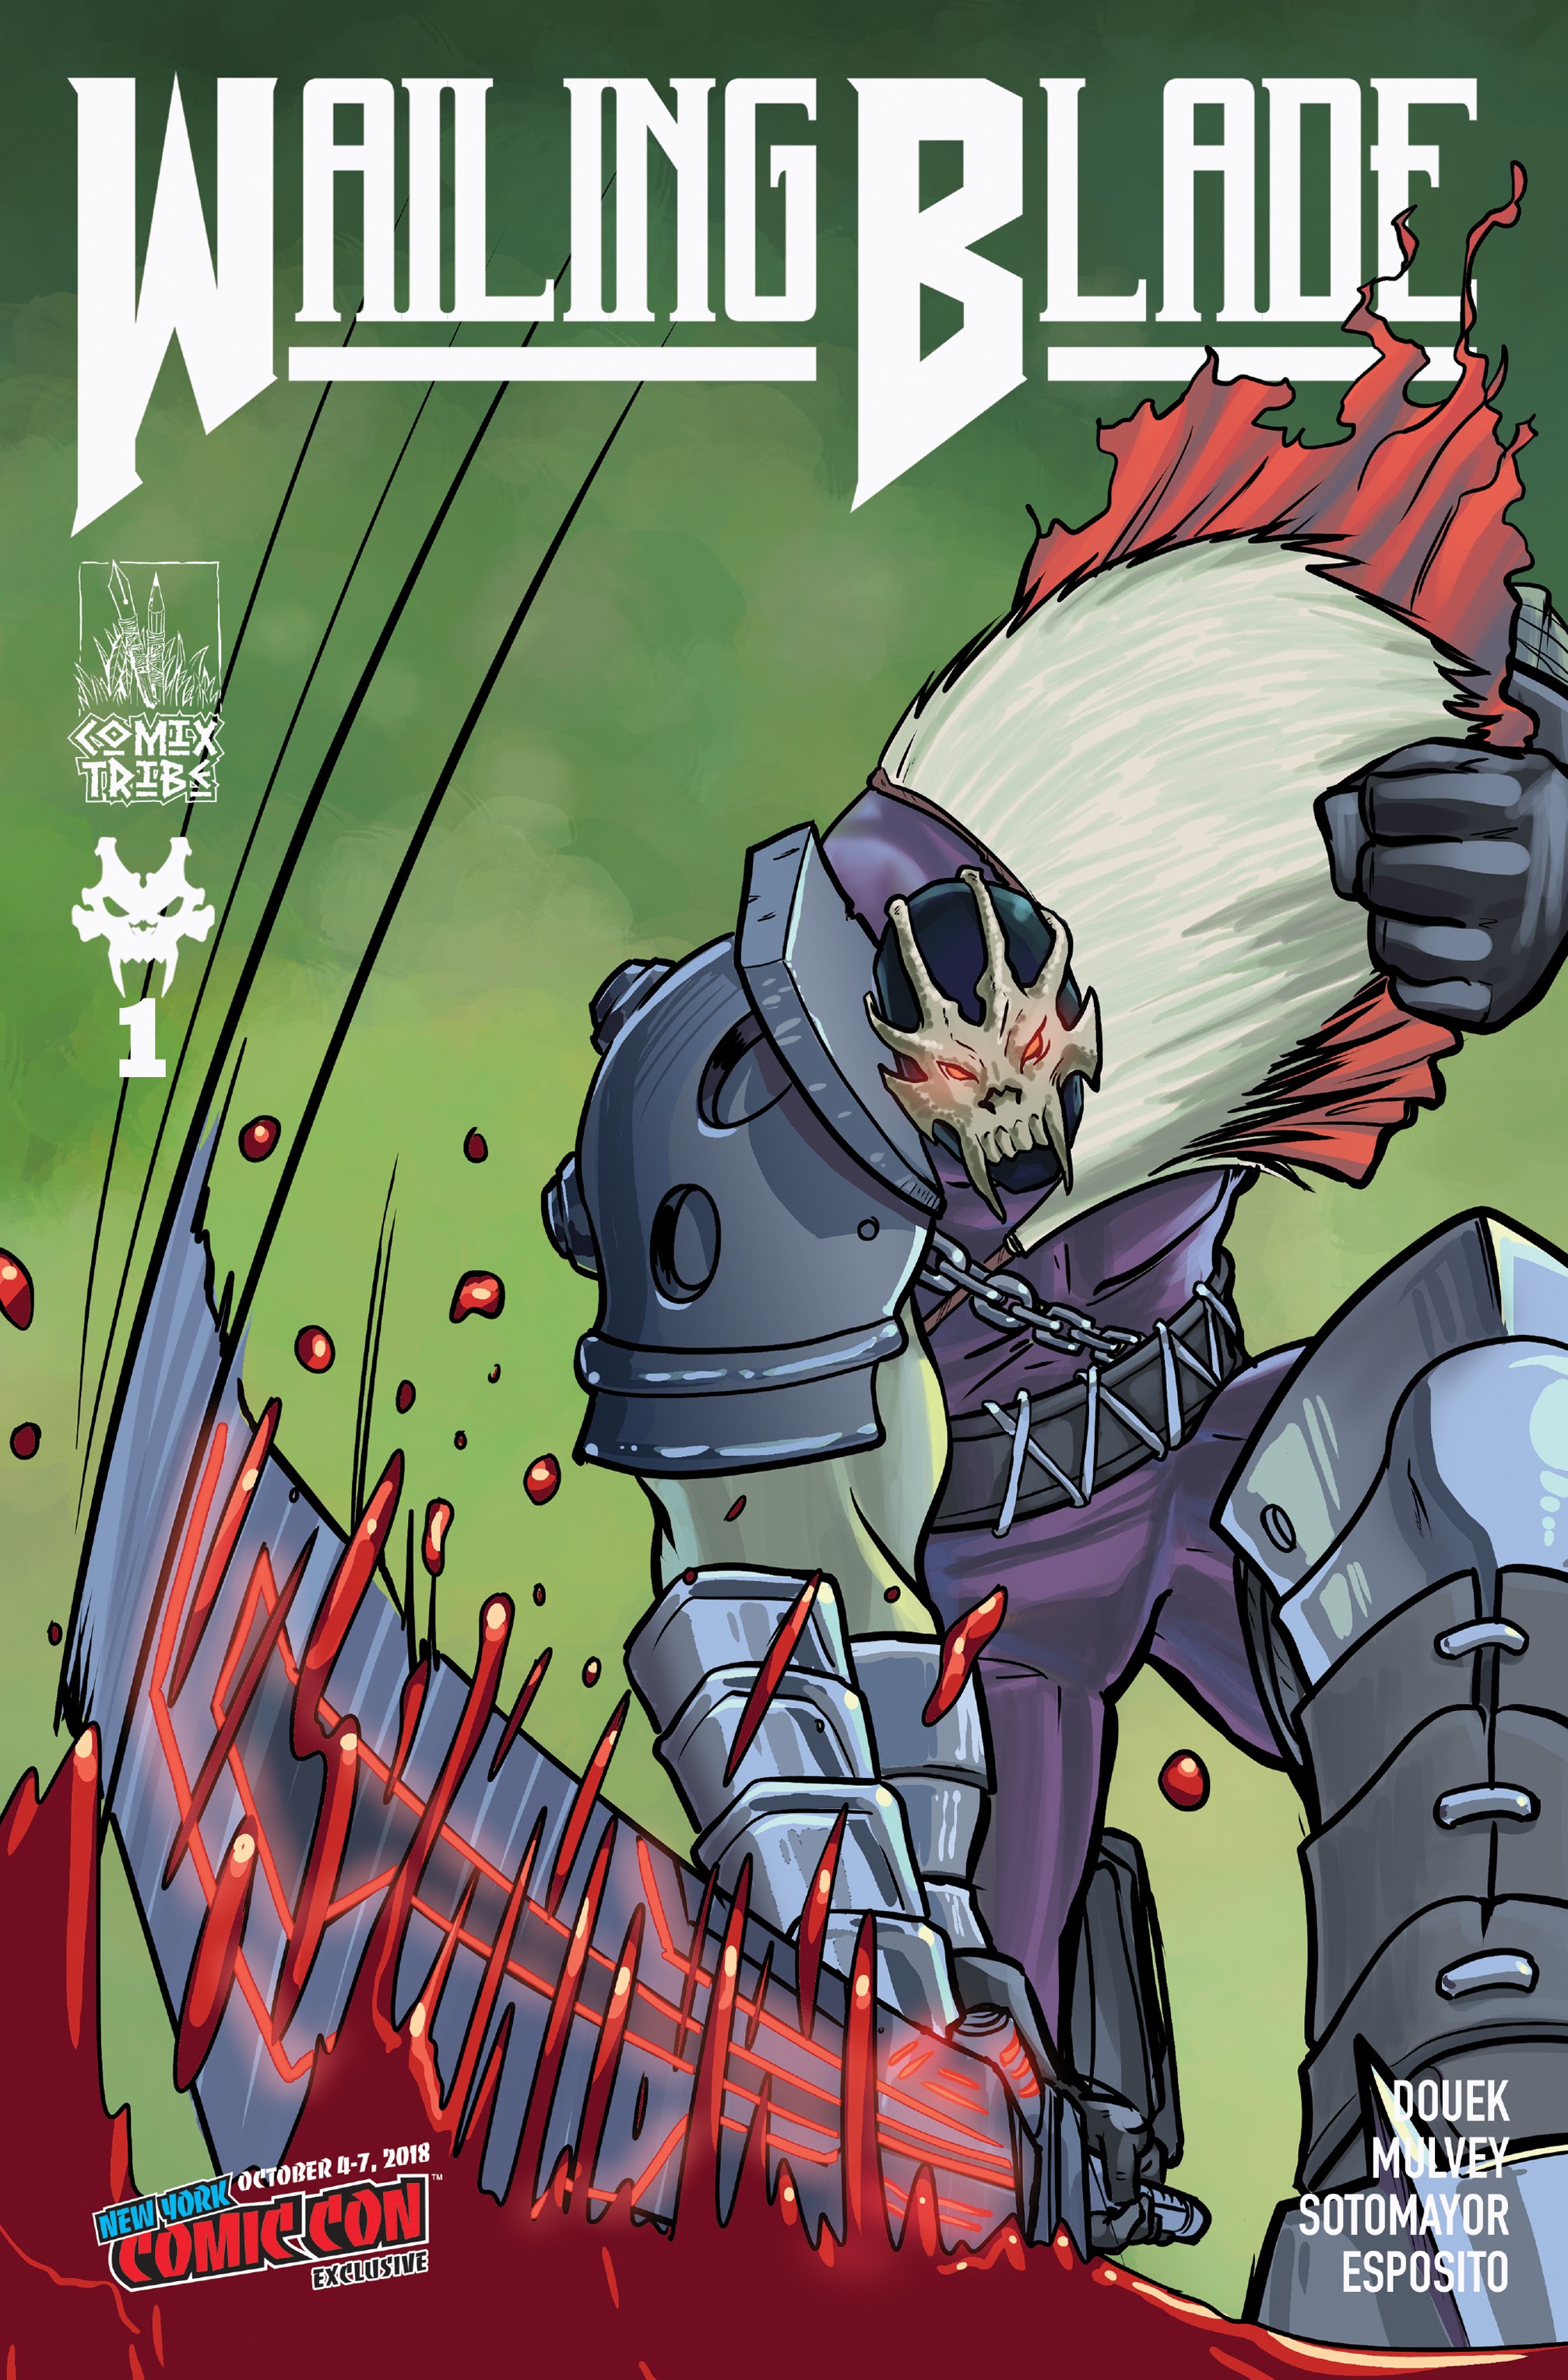 Read online Wailing Blade comic -  Issue #1 - 6